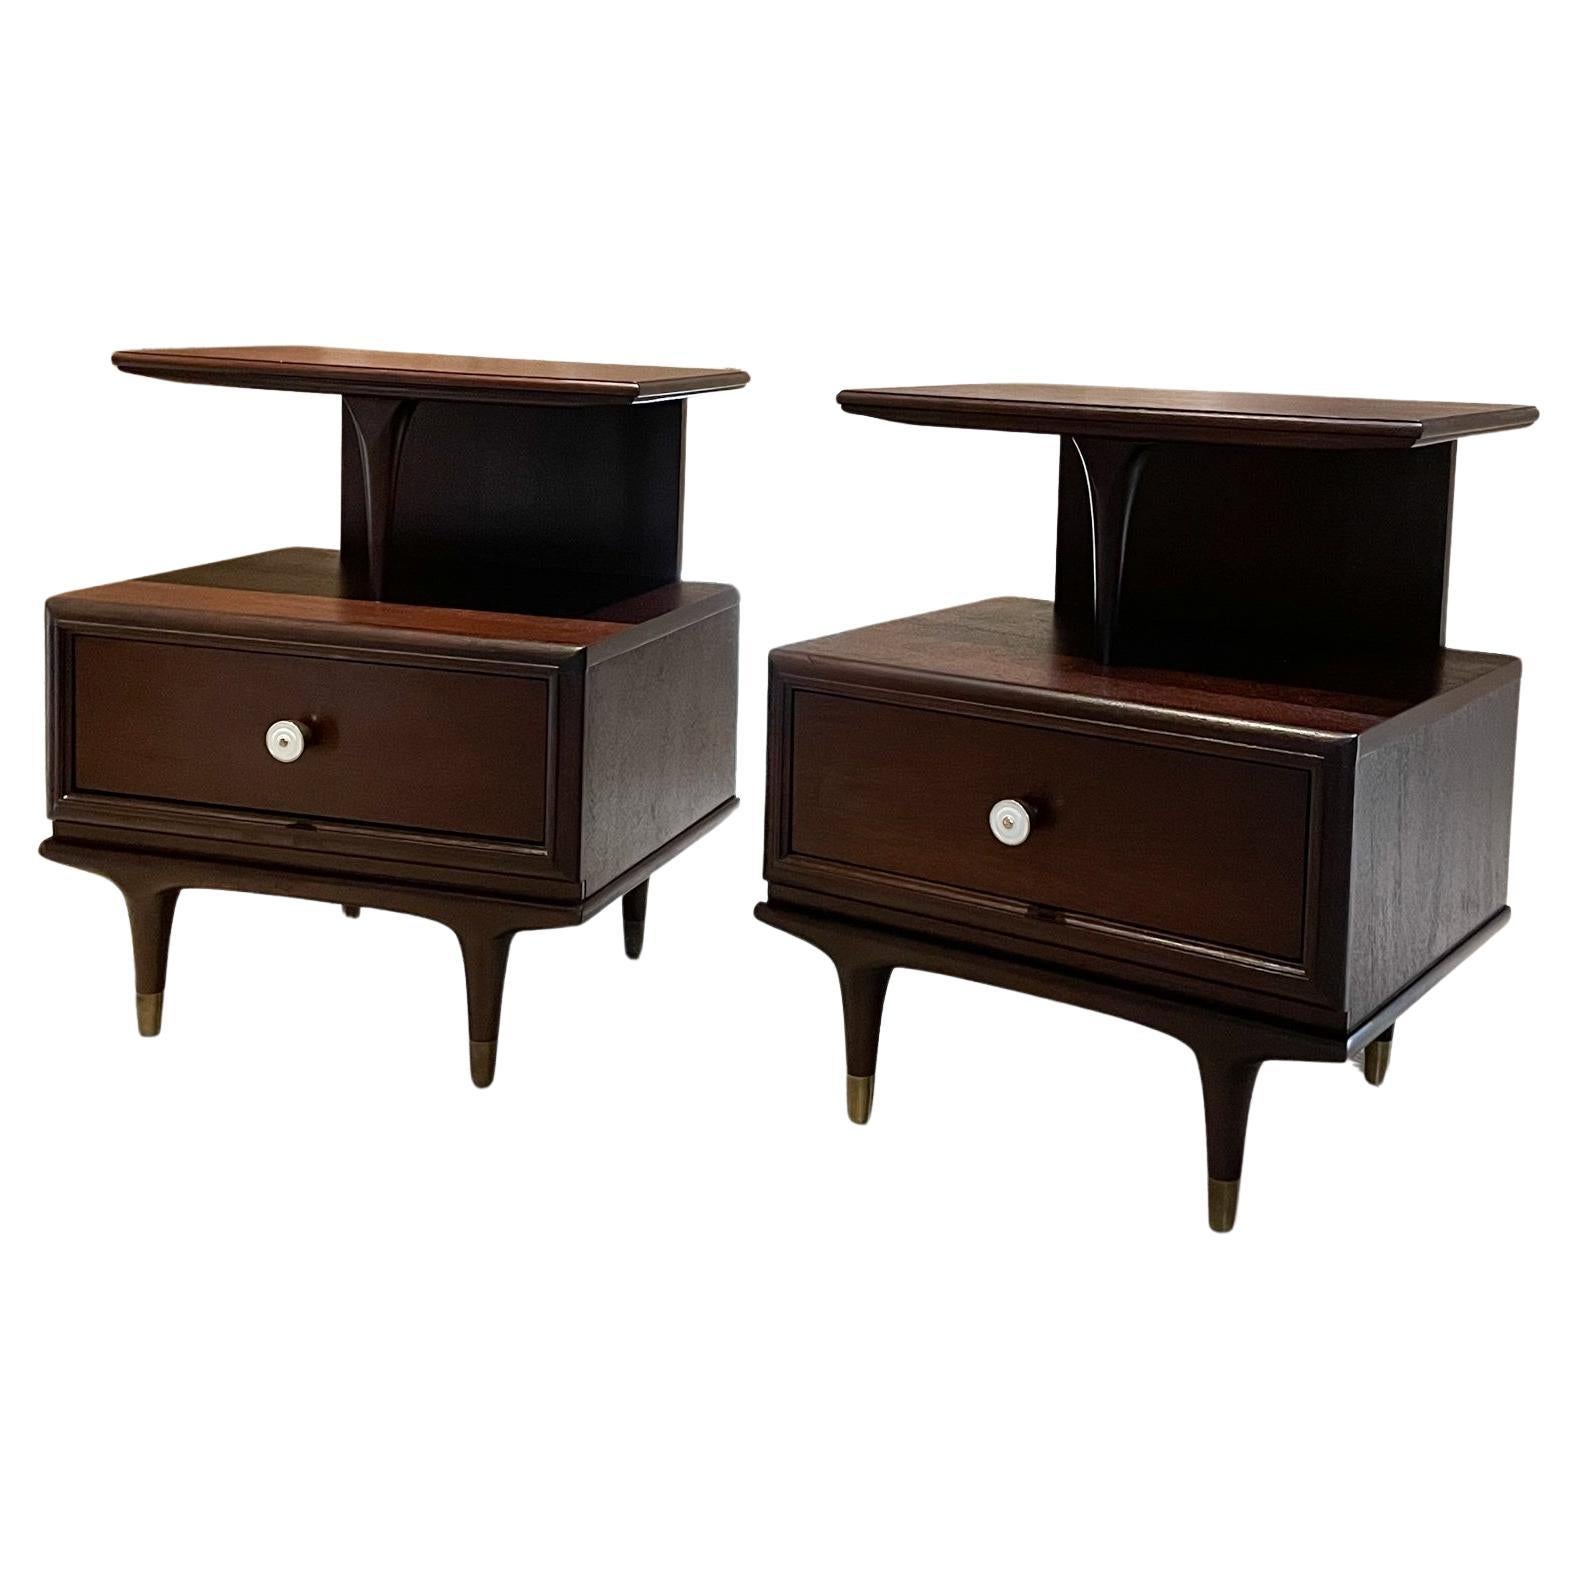 1960s Sensational Mahogany Nightstands Side Tables by Kent Coffey restored For Sale